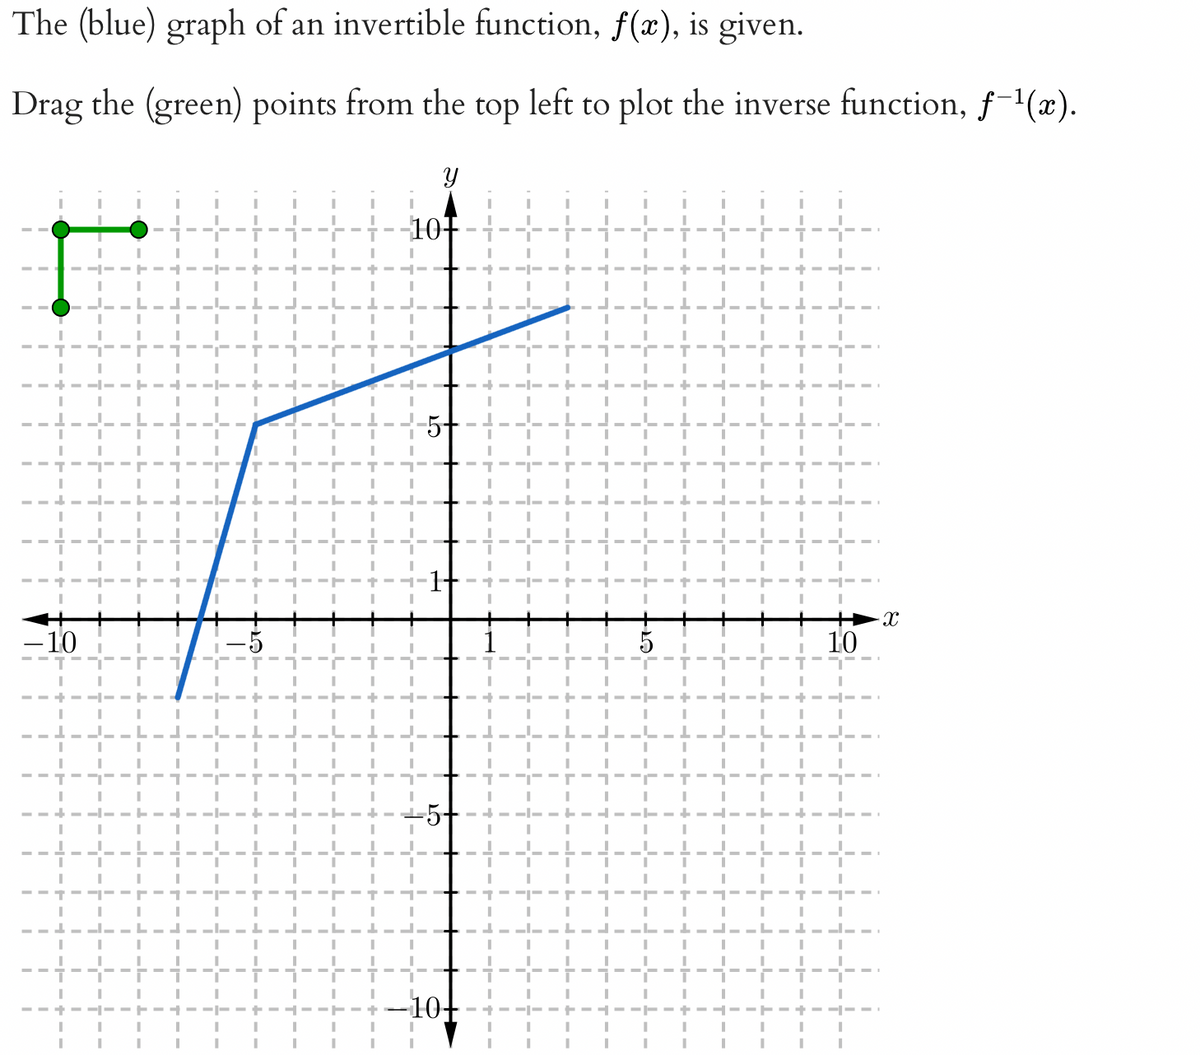 The (blue) graph of an invertible function, f(x), is given.
Drag the (green) points from the top left to plot the inverse function, ƒ-¹(x).
- 10
--+--
I
I
I
I
I
I
I
-T
I
L
I
r
T
--
I
I
r
I
L
-+---- TIL
I
I I
I
+
I
I I
J
I
I
I
I
L
I
I
I
--T
I I I
L I
I
I
I
I
I
L_J
I
+-----+----+
L
r
L
I
L
I I
I
I
I
I
I
I
I
I
TT
I
I
I
I
____________
I
I
ī
I
I
I
|— — +
1
I
I
T
I
I
I
I
-3
I
I
I
----
I
I
TIL
I
I
I
I
I
I
I
I
I
I
I
I
I
I
I
I
I
---+----+
I
1
I
I
L
I
-|--+----+-+-
I
I
I
I
---T-
I
--+-----4--|--+--
I
I
I I
I
I
I
I
I
-----------------------
I
I
I
I
J FIL
I
I
I
I
I I
I
I
I
J.
I
I
I
I
I
I
1
I I
1
I
I
I
I
L-+
I
I
I
I
_J__L_1
I
I
I
I
'r T
I
I
+-+-
I
L I
I
I
I
I
I
I
T
I
I
I
I
I
C- T
I
I
I
1
I
+---
I I
I
I
-ריז
I
I
I
+-+
I
I
Y
-10+
I
I
I
I
I
I
+
L
I
I
1
I
I
L
I
I
I
T
I
I
I
I
I
I
I
+ --- --
I
I
I
----
I I
I
I
I
T
I
I
I
I
I
I
I
==
I
I
------|-
I
+---
I
I
I
I
I
I
I
I
I
I
7-4-
T
1
I I
J
I
I
I
I
I
I
T
I
1
M
I
I
I
I
I
_D__L_1_
I
I
I
I
I
-
I
L
I
I
I
I
I
I
I
1
L
I
I
I
I
L
I
I
I
J __-_-_J__L_I_J_
I
I
I
I
-----+--
I
I
I
I
I
I
-|--+----+-+-
I
I
1
I
I
|--+-4
I
I
+--
I
I
I
I
T
I
I
--+
I
I
I
I
I
I
I
I
I I
___J_______
I
I
5
I
I
-----
I
I
I
T
I I I I
I
I
I
I
I
+ -|--+----+-+----+-+----·
I
I
F
I
I
1
I
I
I
I
I
1
I
I
L 1
T
I
I
7
I
I
I
T
I
I
I
I
1
I
1
L
I
I
I
I
I
I
I
I
I
I
I
I
'r
I
I
+--
I
I
I
I
I
I
T-+--|--
I I I
L_J_L__
I
I
I
7--
I
I
I
+-+---
I
J
I
I
T-1
I
I
I
I
I
-|---------------------
I
I
I
I
'r
I
I I
I
L
I
I
I
I
1
I
r T
I
I
I
T 7
I
I
|
I
I
I
•
I
I
L
I
I
ī
I
I I
L_1_J_
I
I
I
I
LLLL
I I
I
I
I
I
I
I
-----+--
10
I
I
T 7
I
I
I
I
I
I
I
I
I
I
I
I
+----
I
I
X